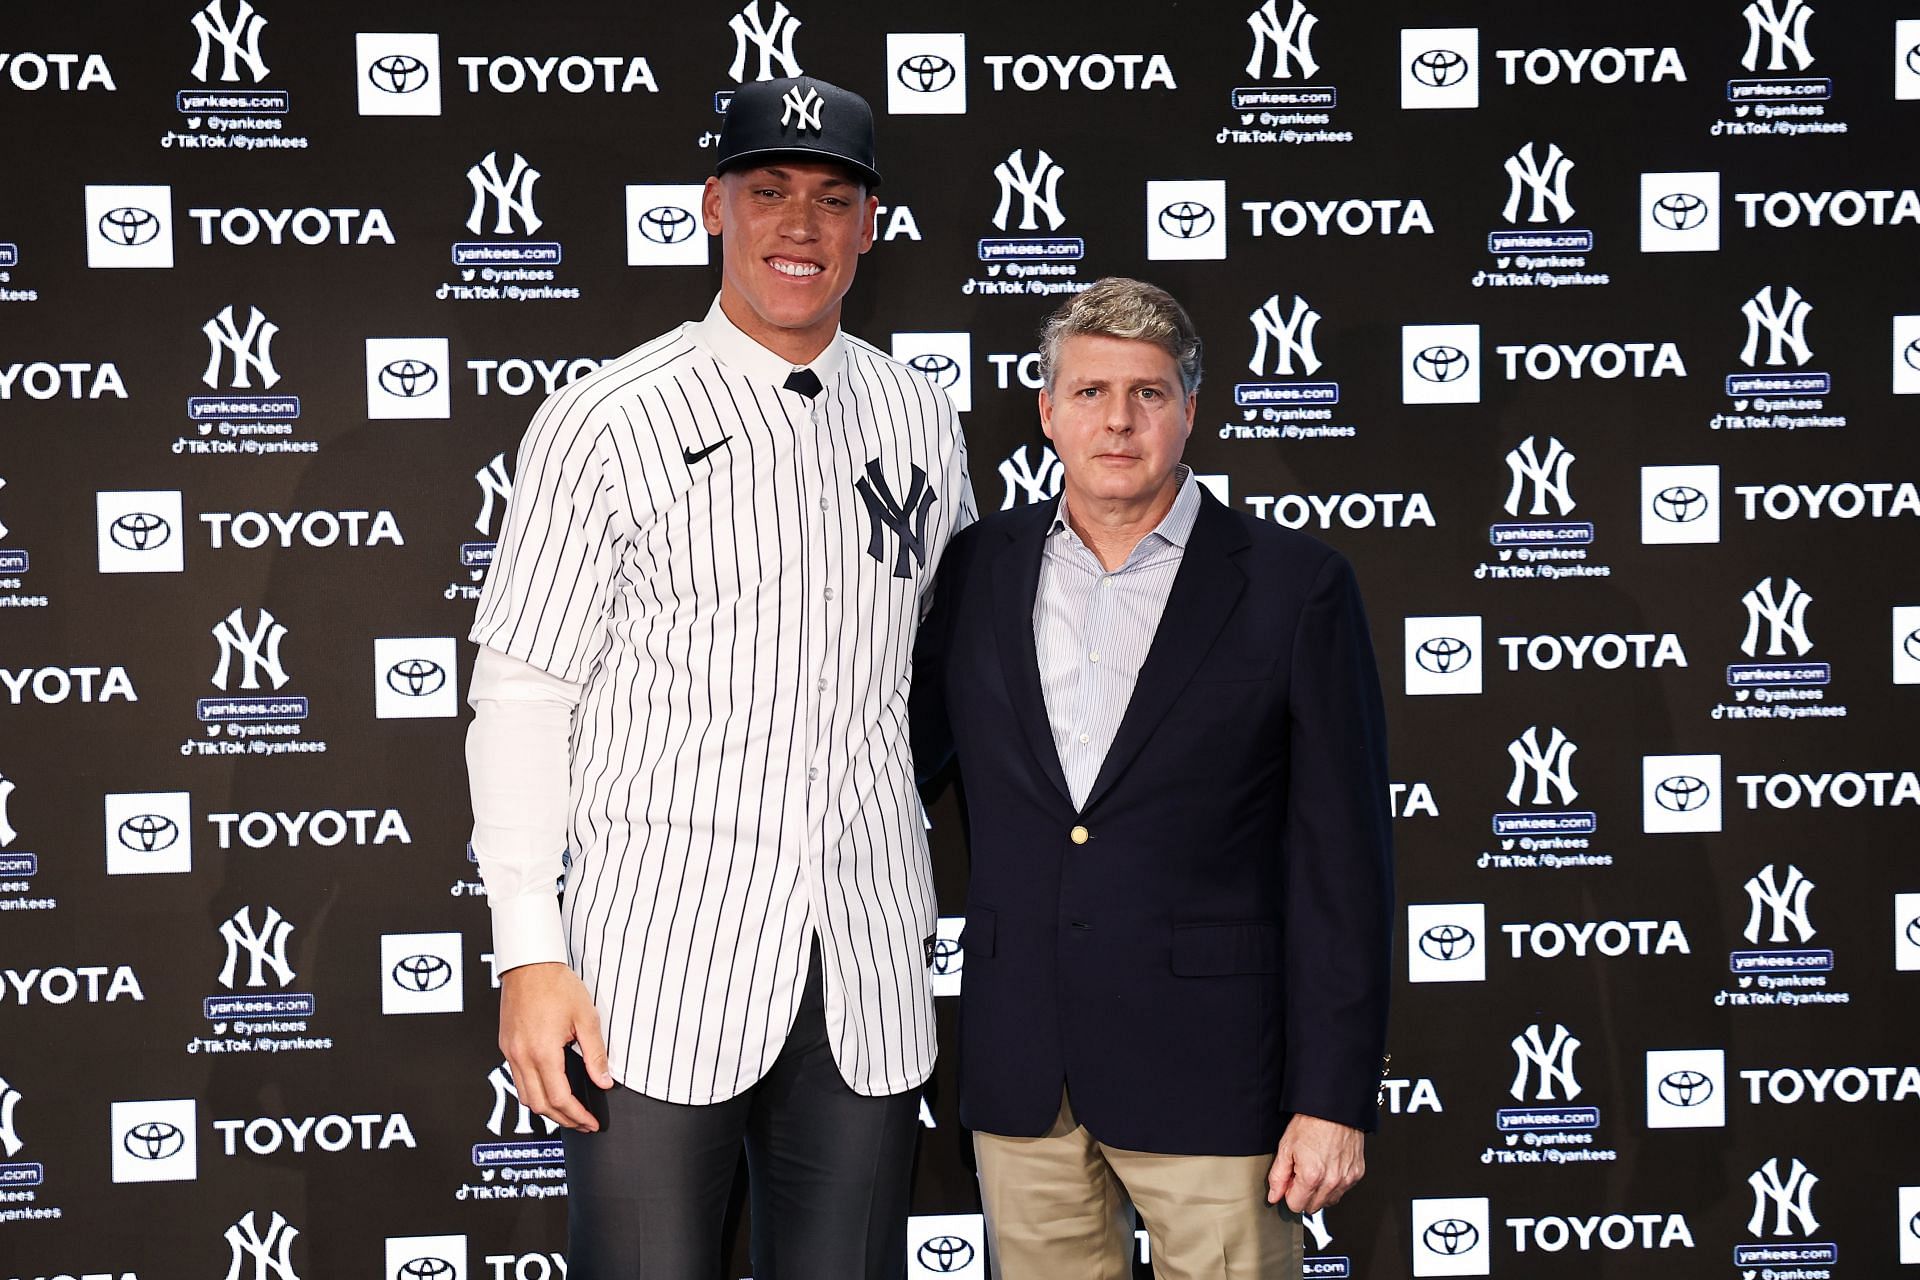 Aaron Judge Press Conference: BRONX, NEW YORK - DECEMBER 21: Aaron Judge (99) of the New York Yankees poses for a photo with Yankees principal owner Hal Steinbrenner after a press conference at Yankee Stadium on December 21, 2022, in Bronx, New York. (Photo by Dustin Satloff/Getty Images)